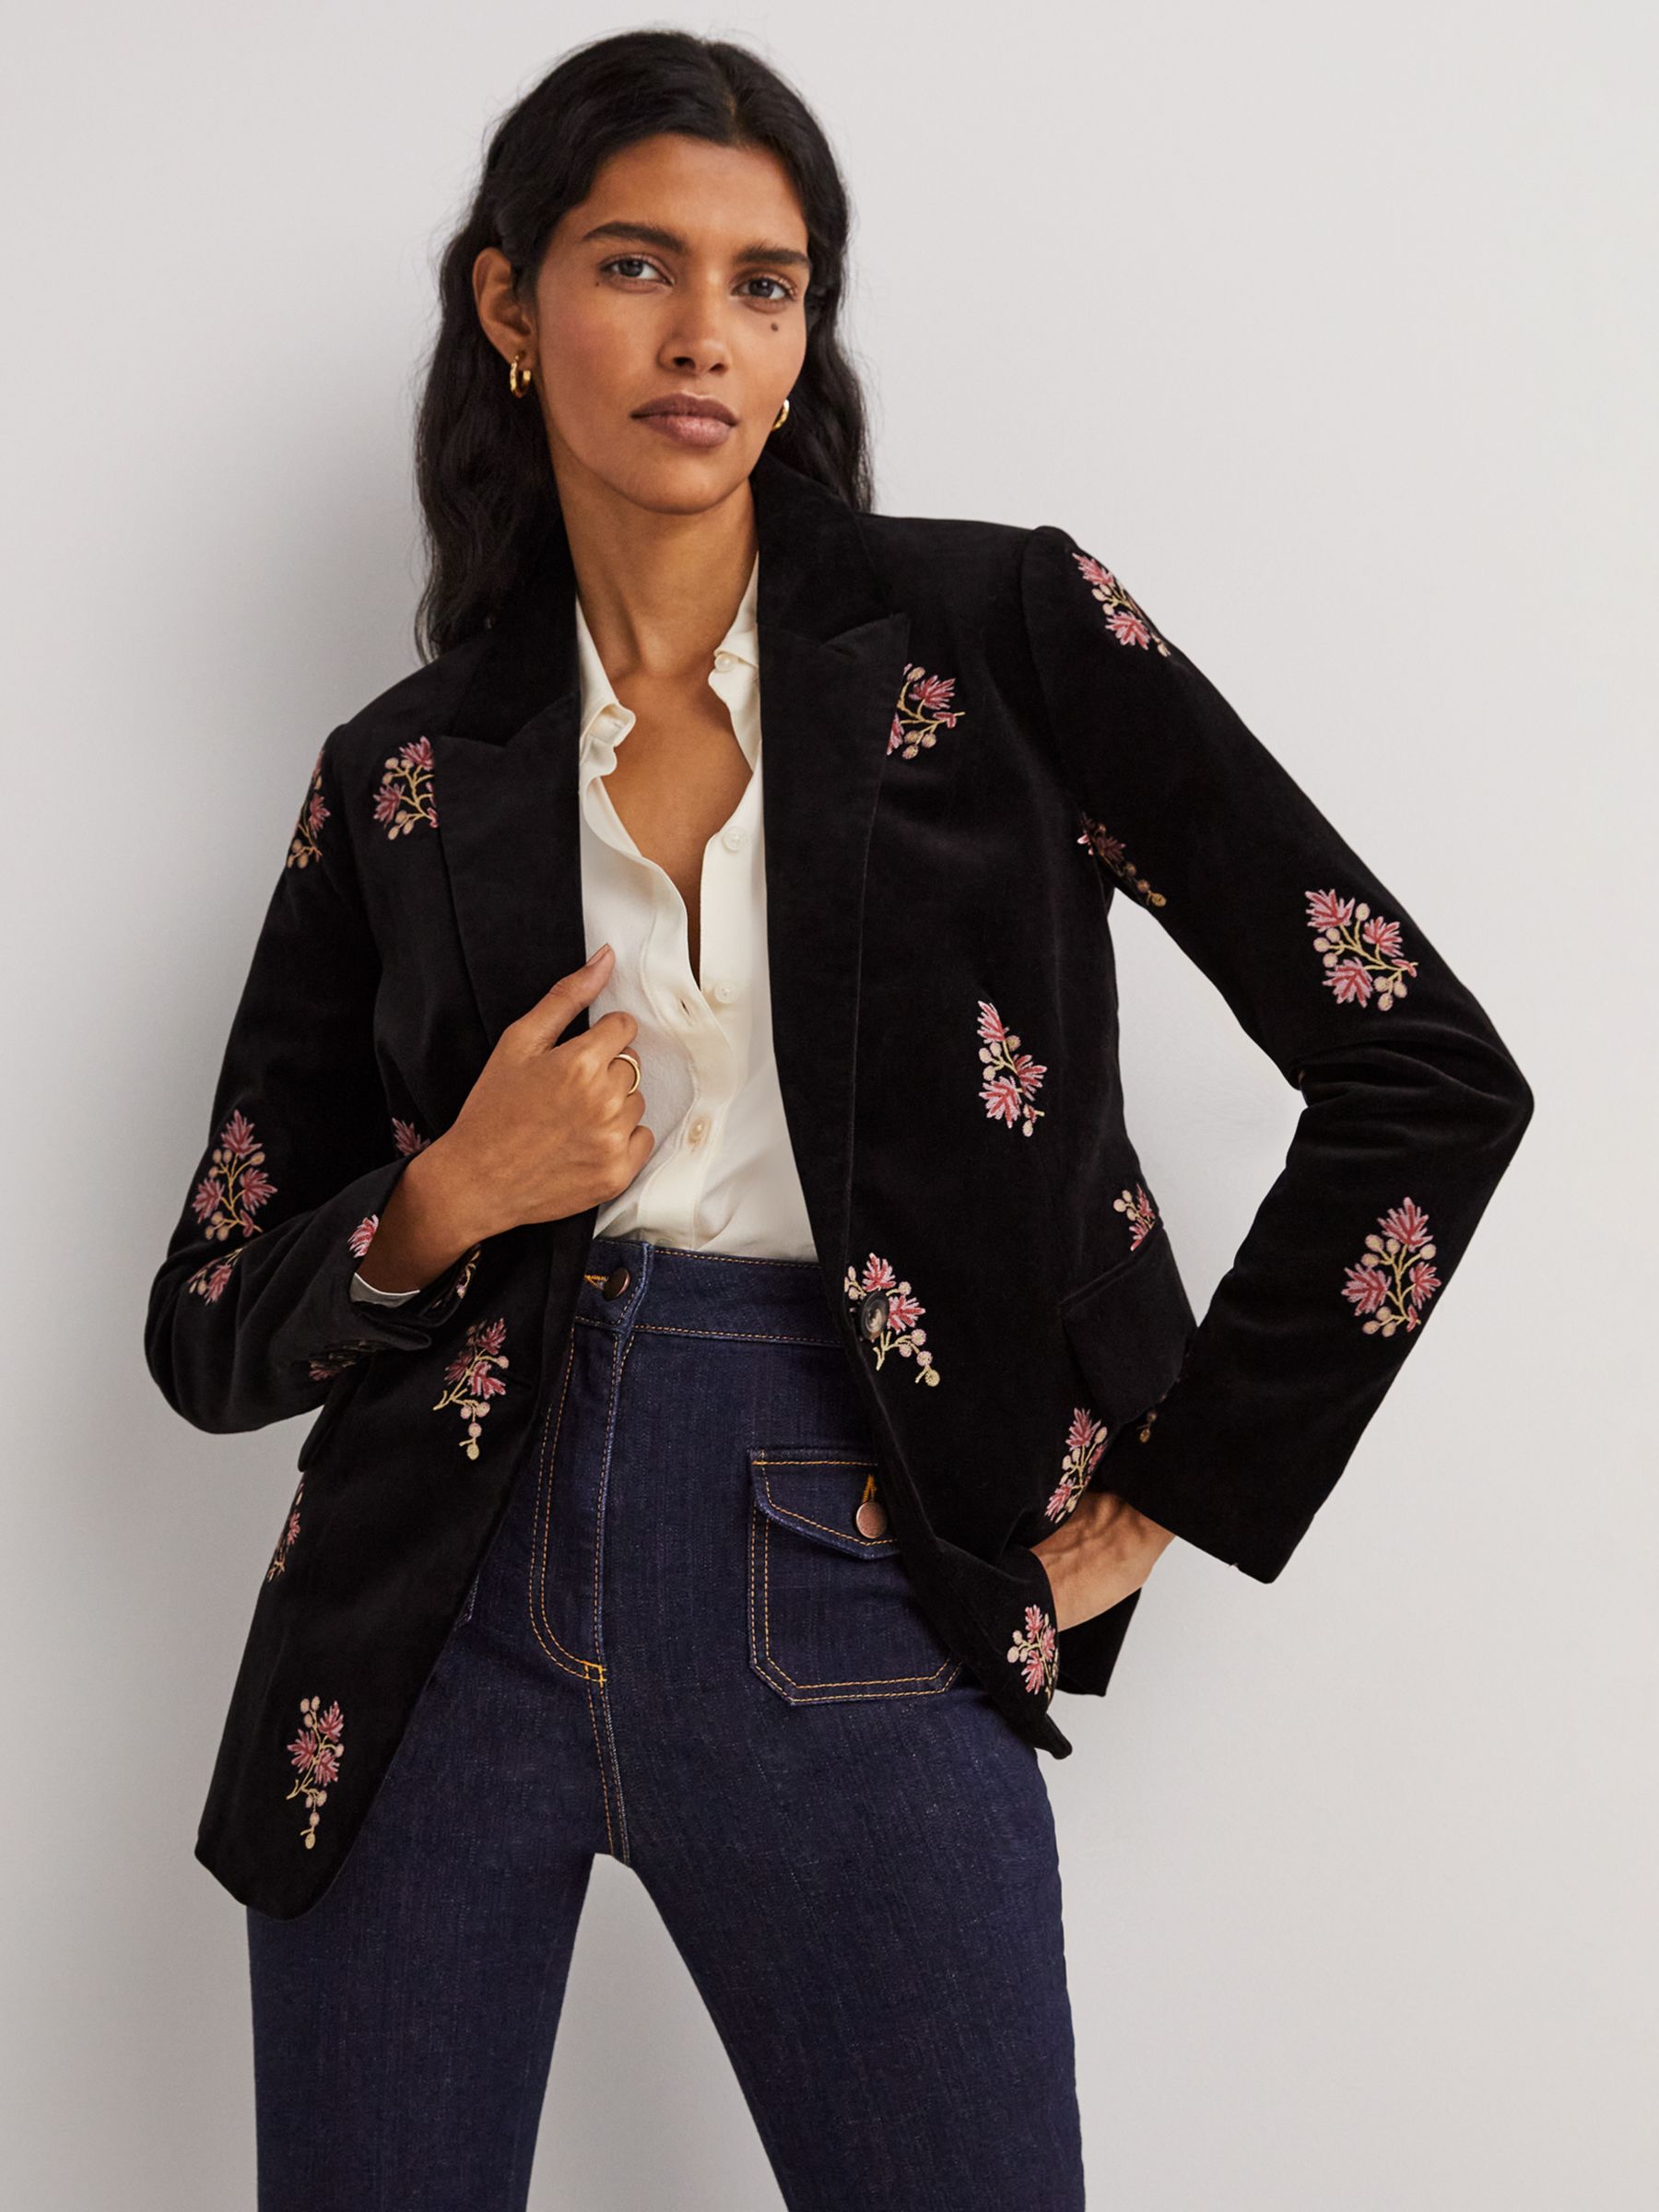 Boden Semi-Fitted Floral Embroidery Tailored Blazer, Black/Multi, 8